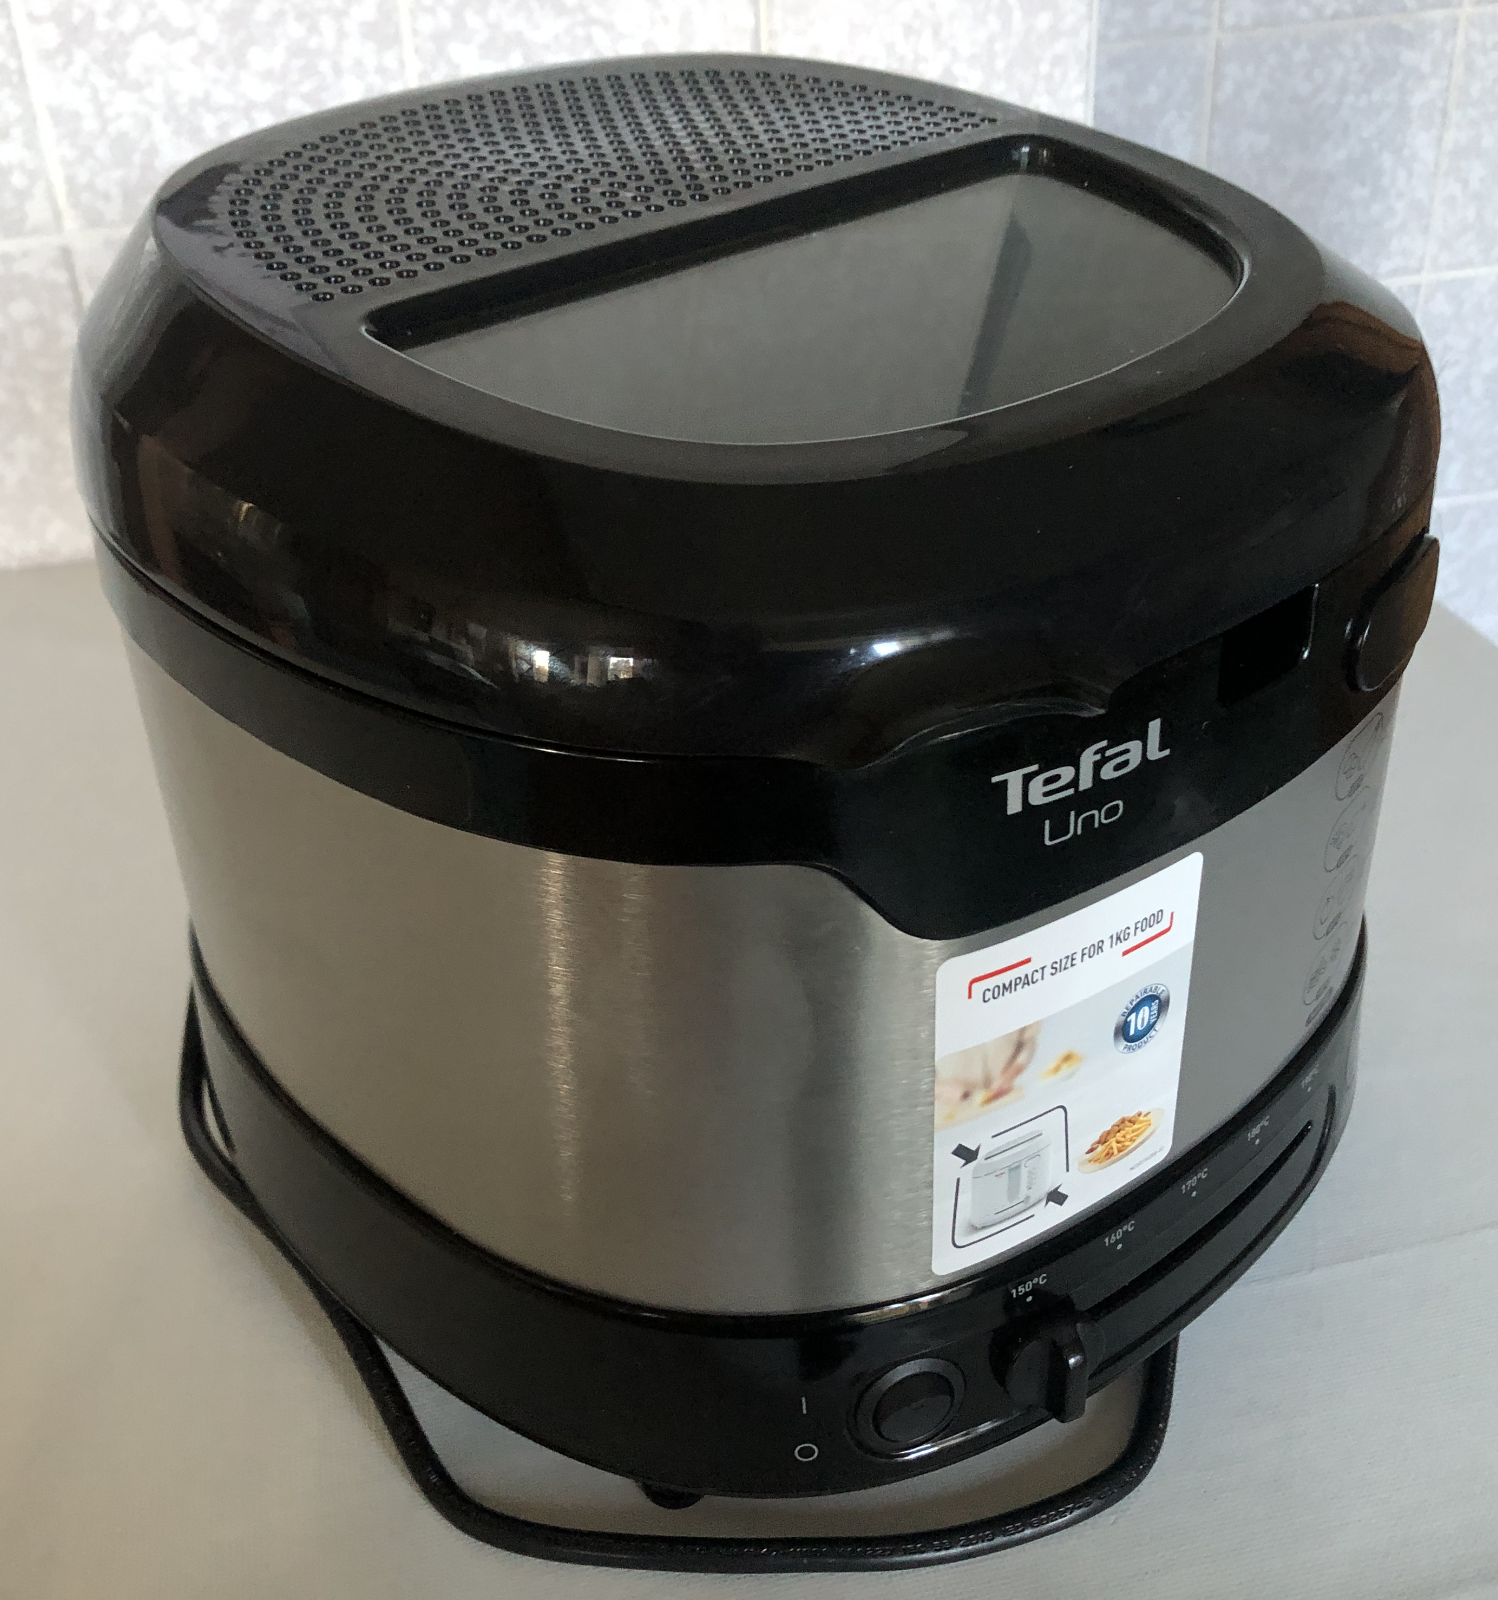 tefal uno m fritteuse test